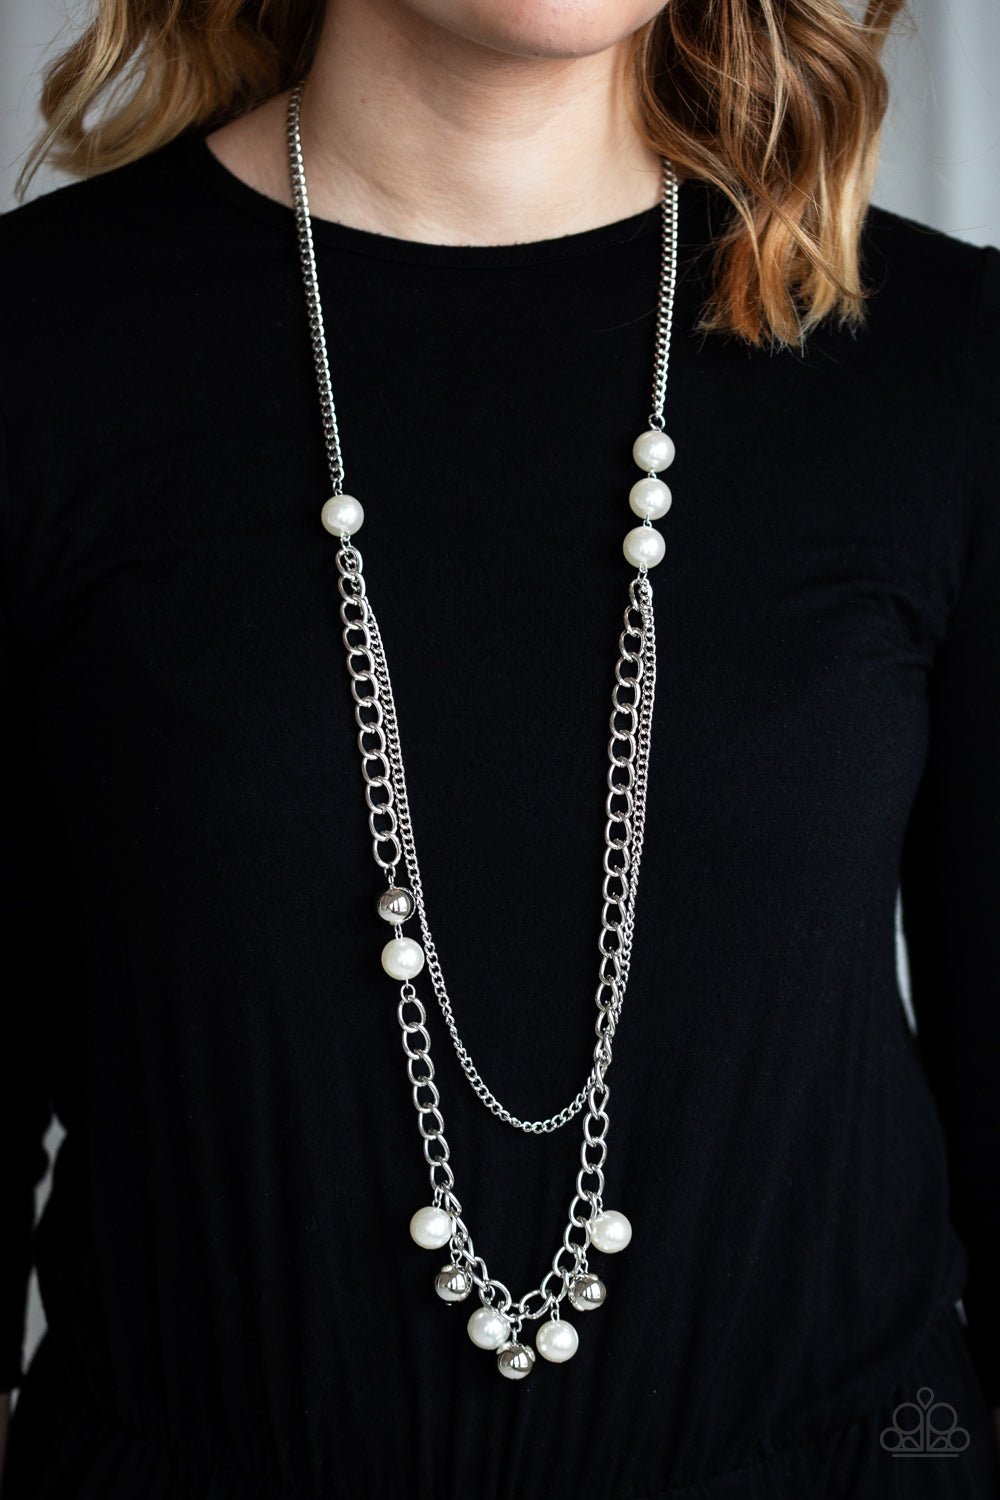 Paparazzi necklace - Modern Musical - White